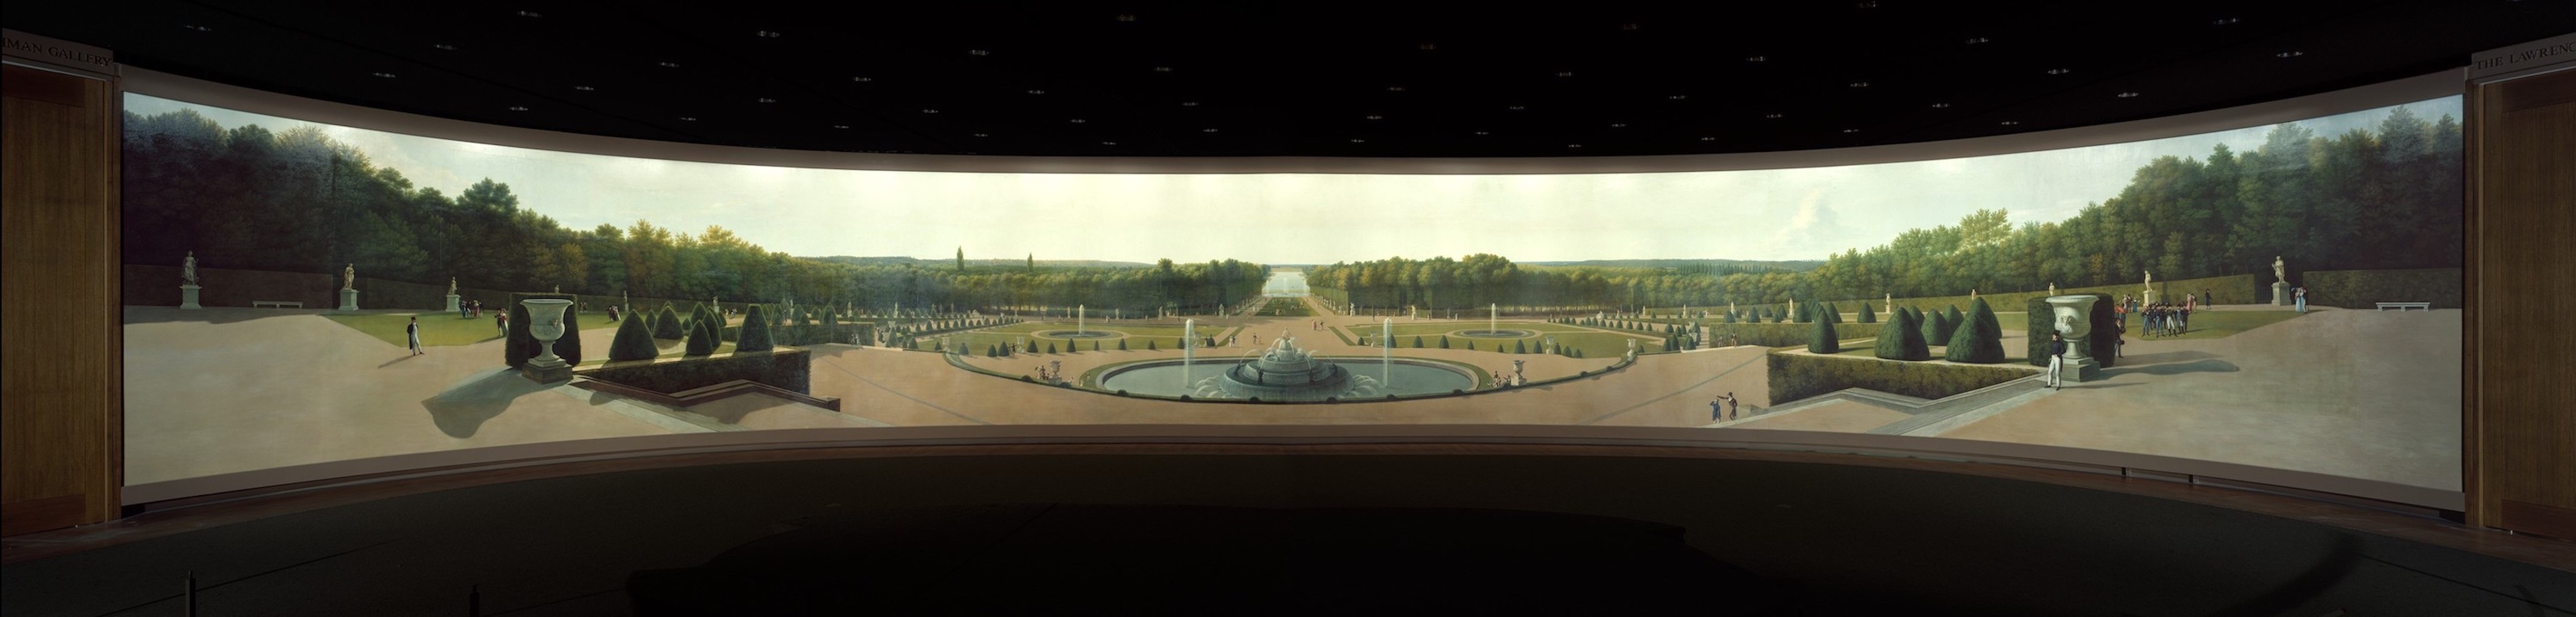 John Vanderlyn, Panoramic View of the Palace and Gardens of Versailles, 1818–19, oil on canvas, 12 x 165 ft. (Metropolitan Museum of Art)